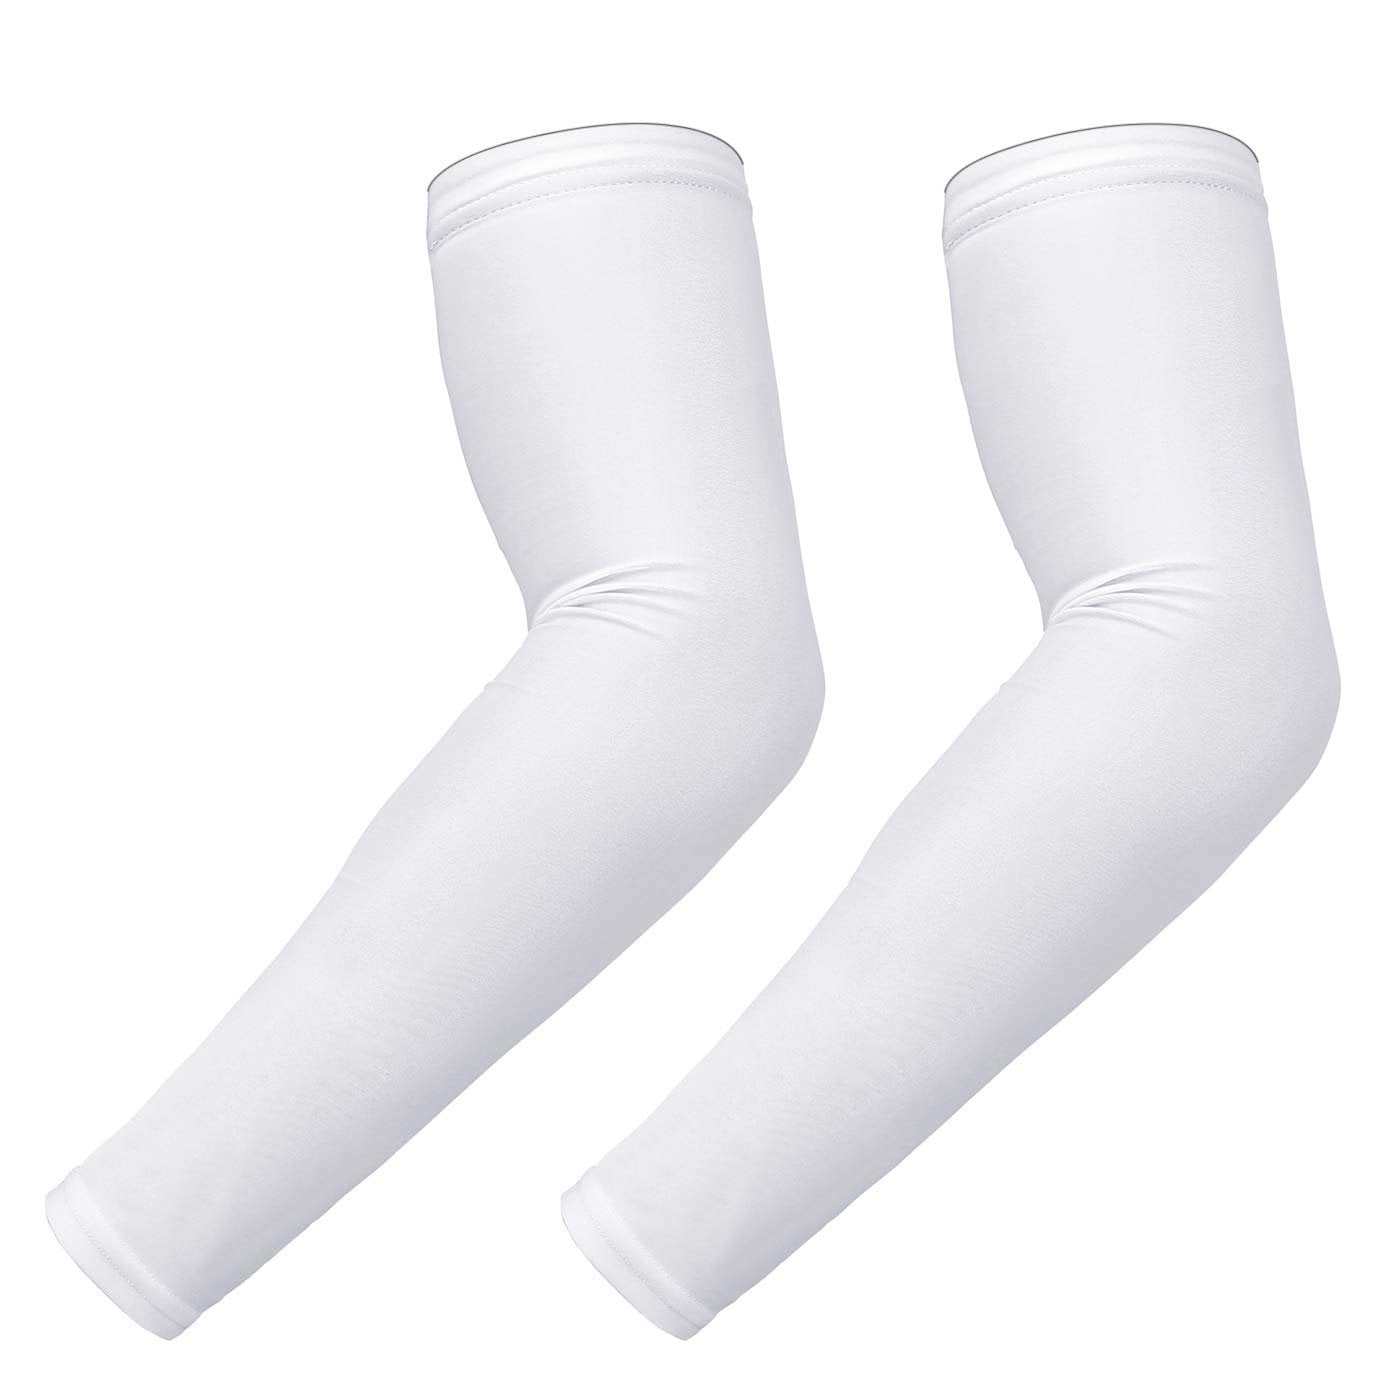 Pair Compression Sleeve Arm UV Protection Basketball Baseball Football HDE Arm Sleeves for Men Women